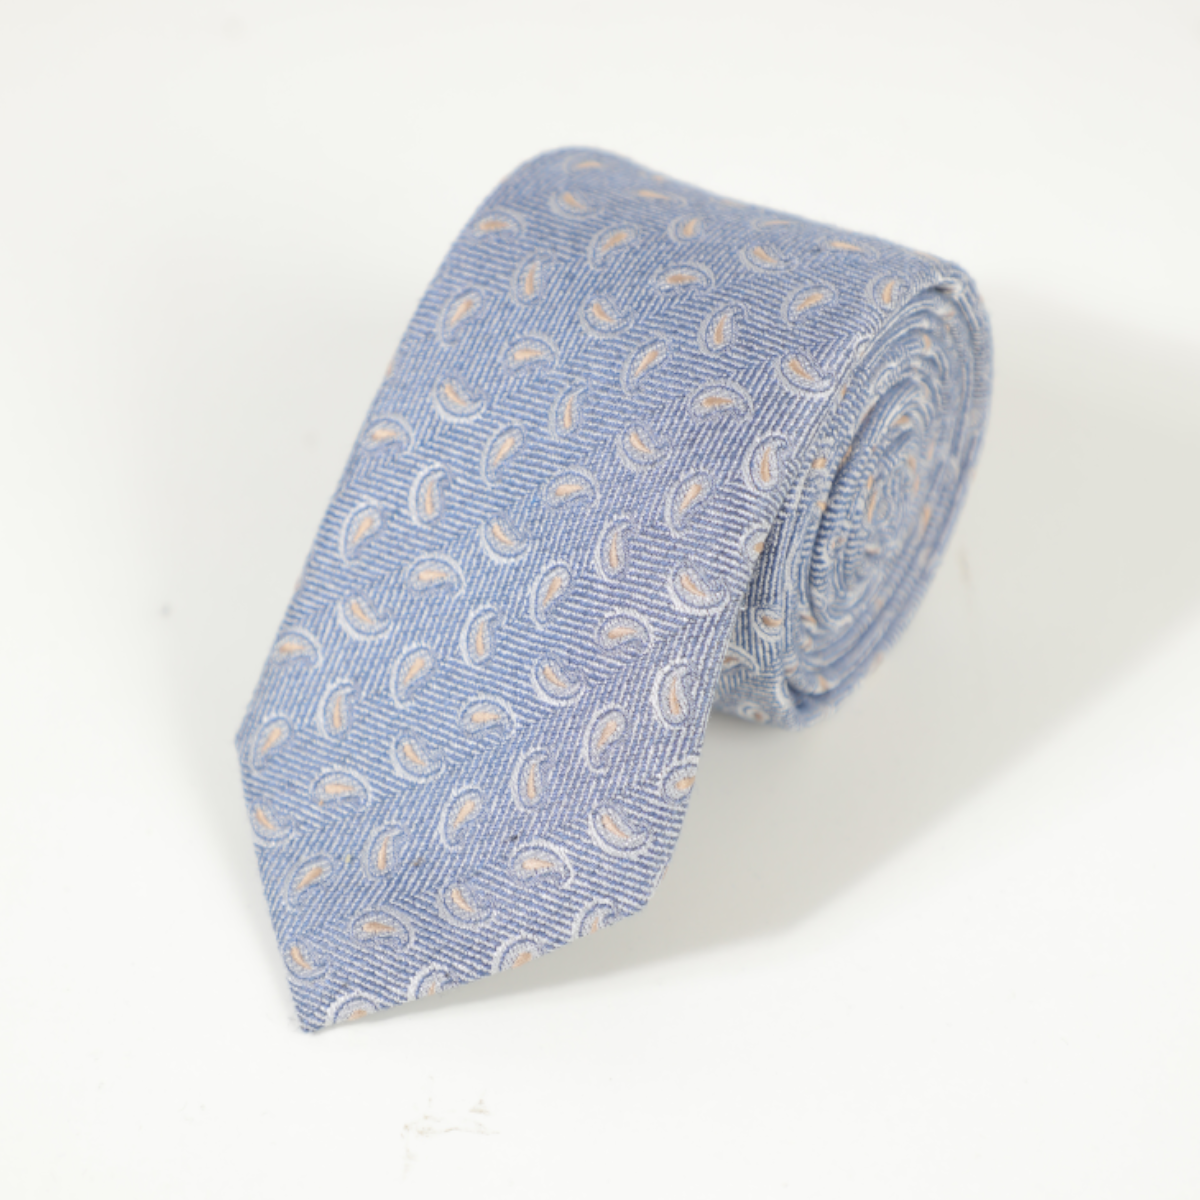 D's Damat Blue Tie With Micro Pattern Design